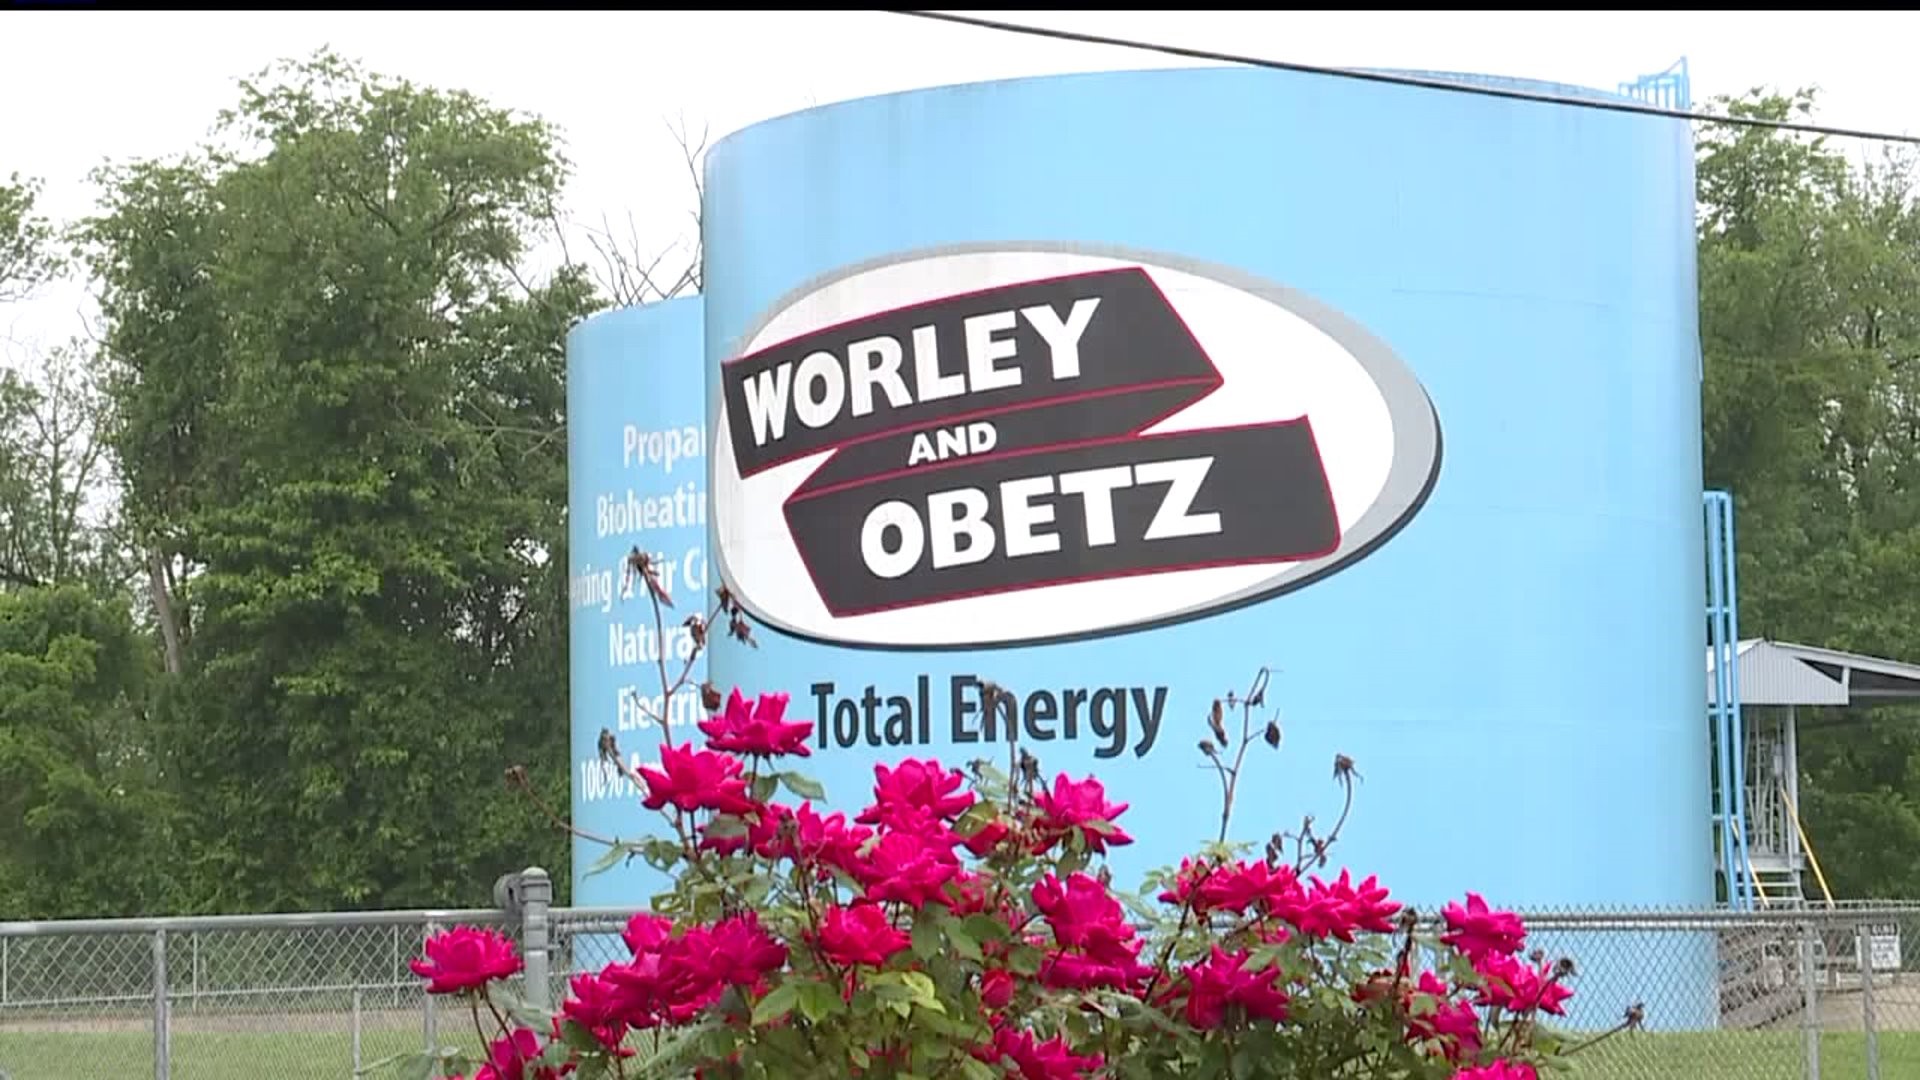 Worley & Obetz in Lancaster County abruptly closes